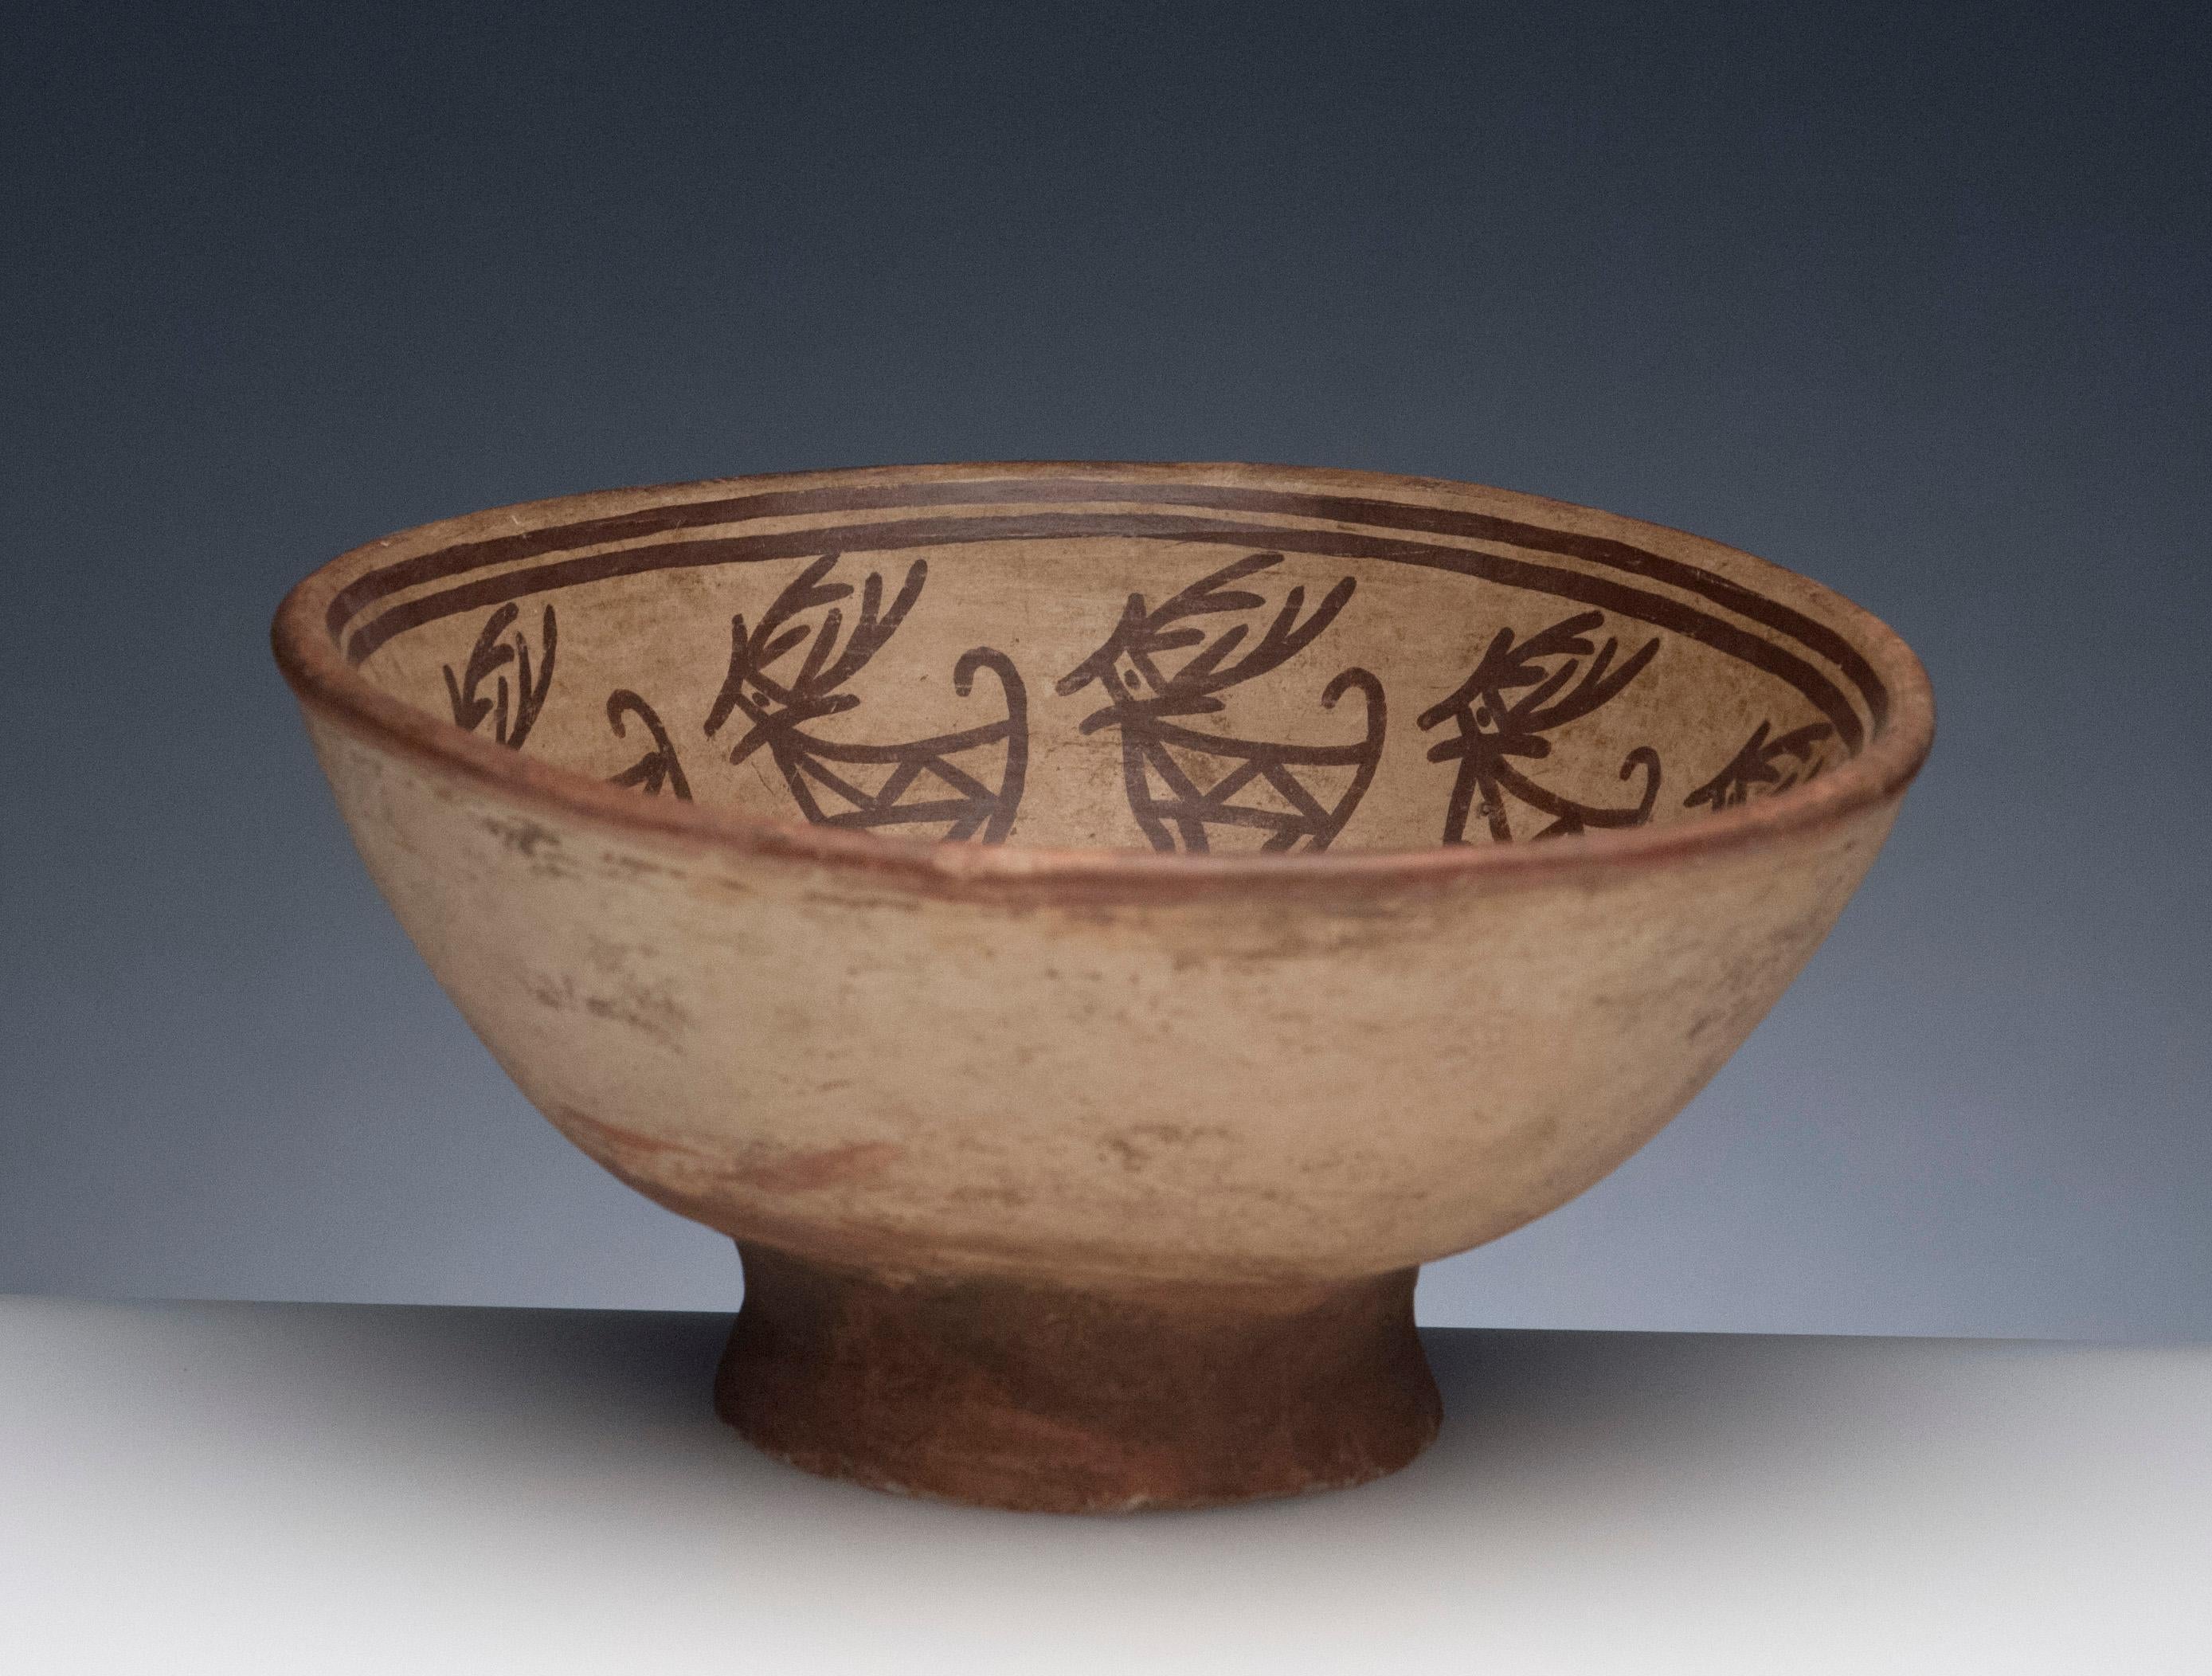 Fine Pre-Columbian Narino footed bowl, circa 850 to 1500. Bowl depicts deer image with alternating eight pointed star symbol, most likely Venus.